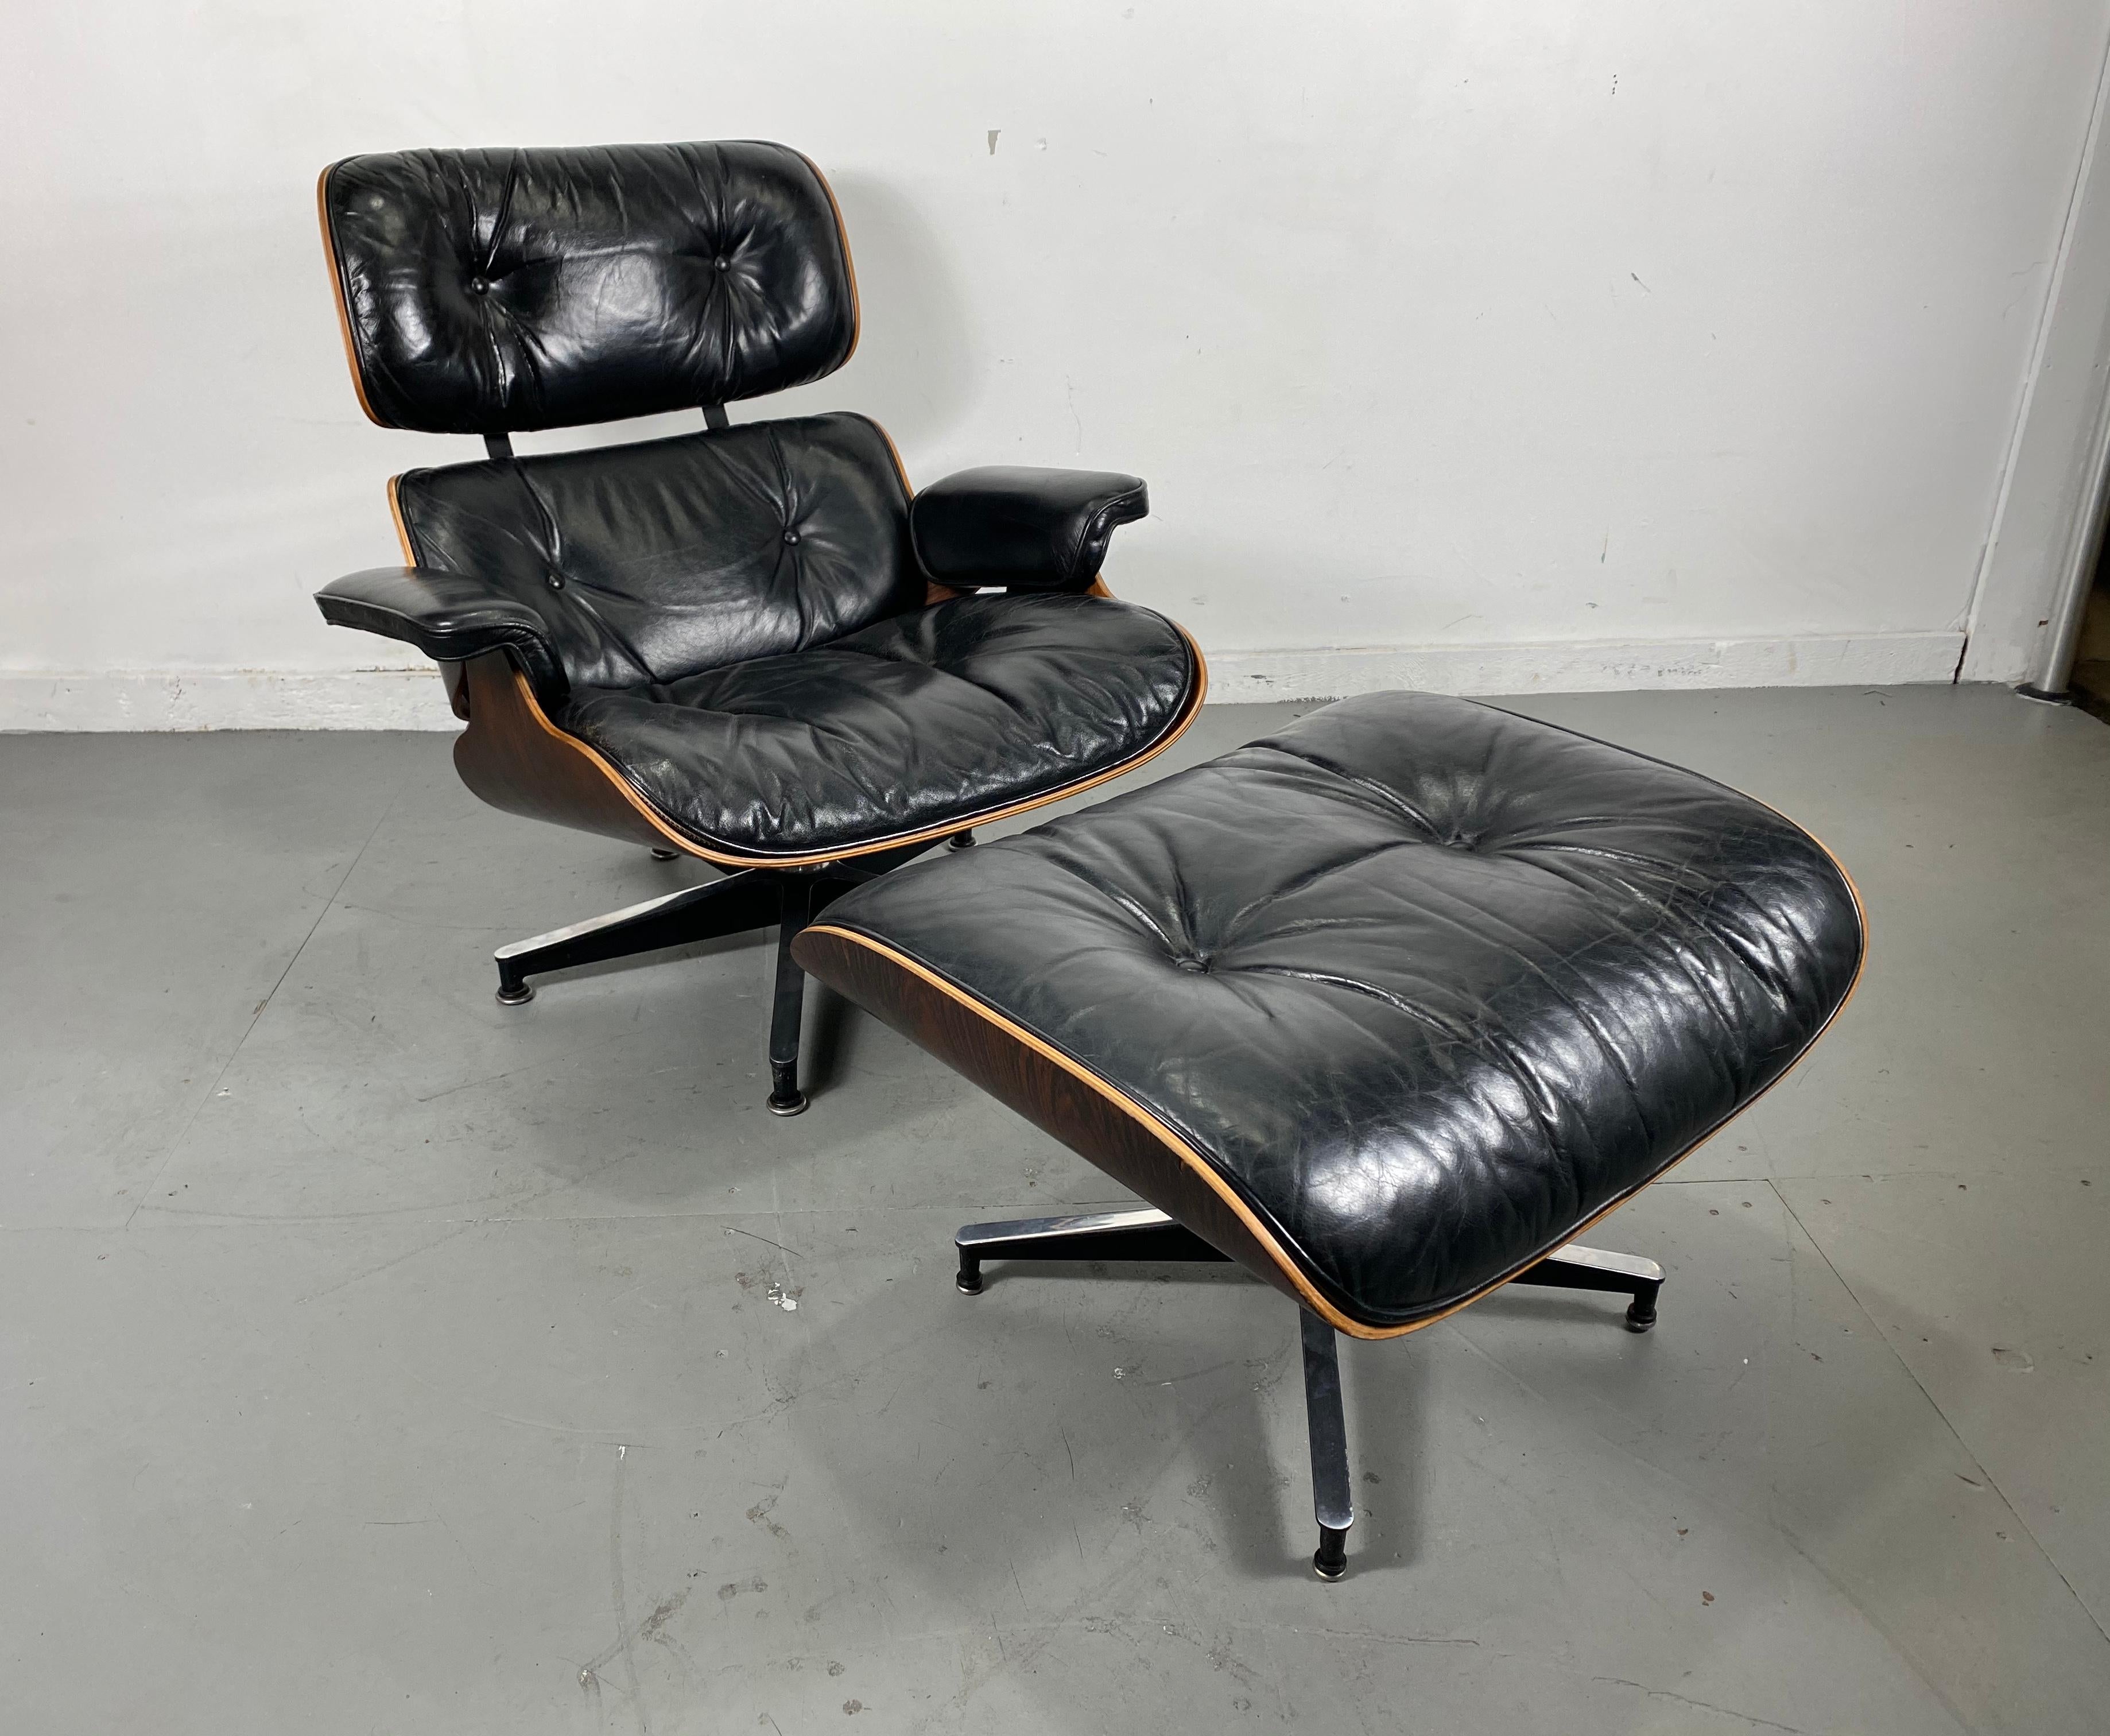 Nice richly rained Brazilian rosewood / black leather lounge chair and ottoman designed by Charles Eames manufactured by Herman Miller, circa 1970s. Amazing original condition, leather showing perfect aged patina while still supple and extremely